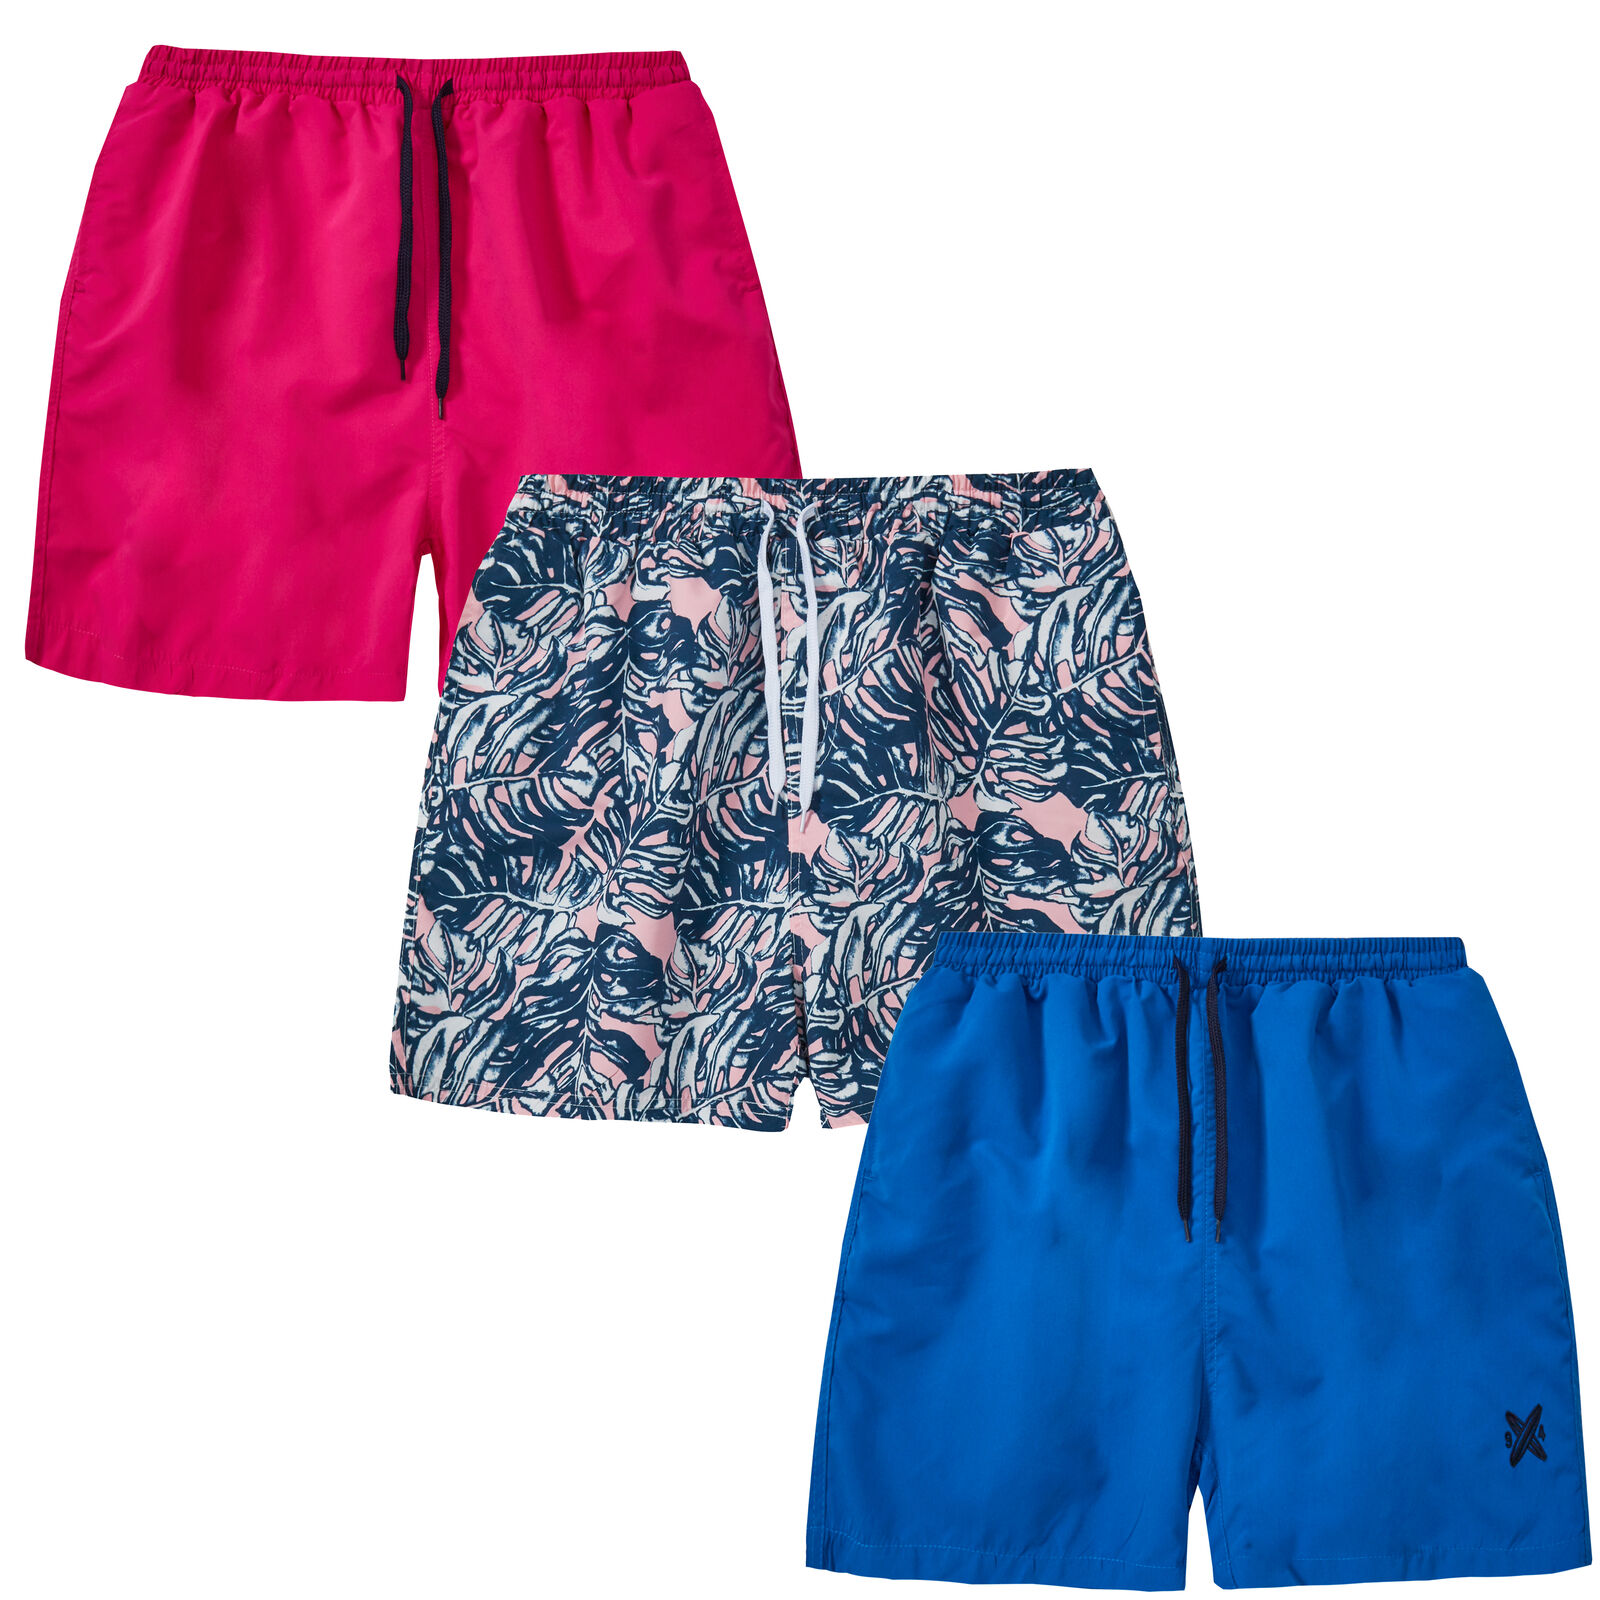 Mens Quick Dry Swim Wear Shorts Trunks Pockets Surf Board Plus Size 3 Pack 